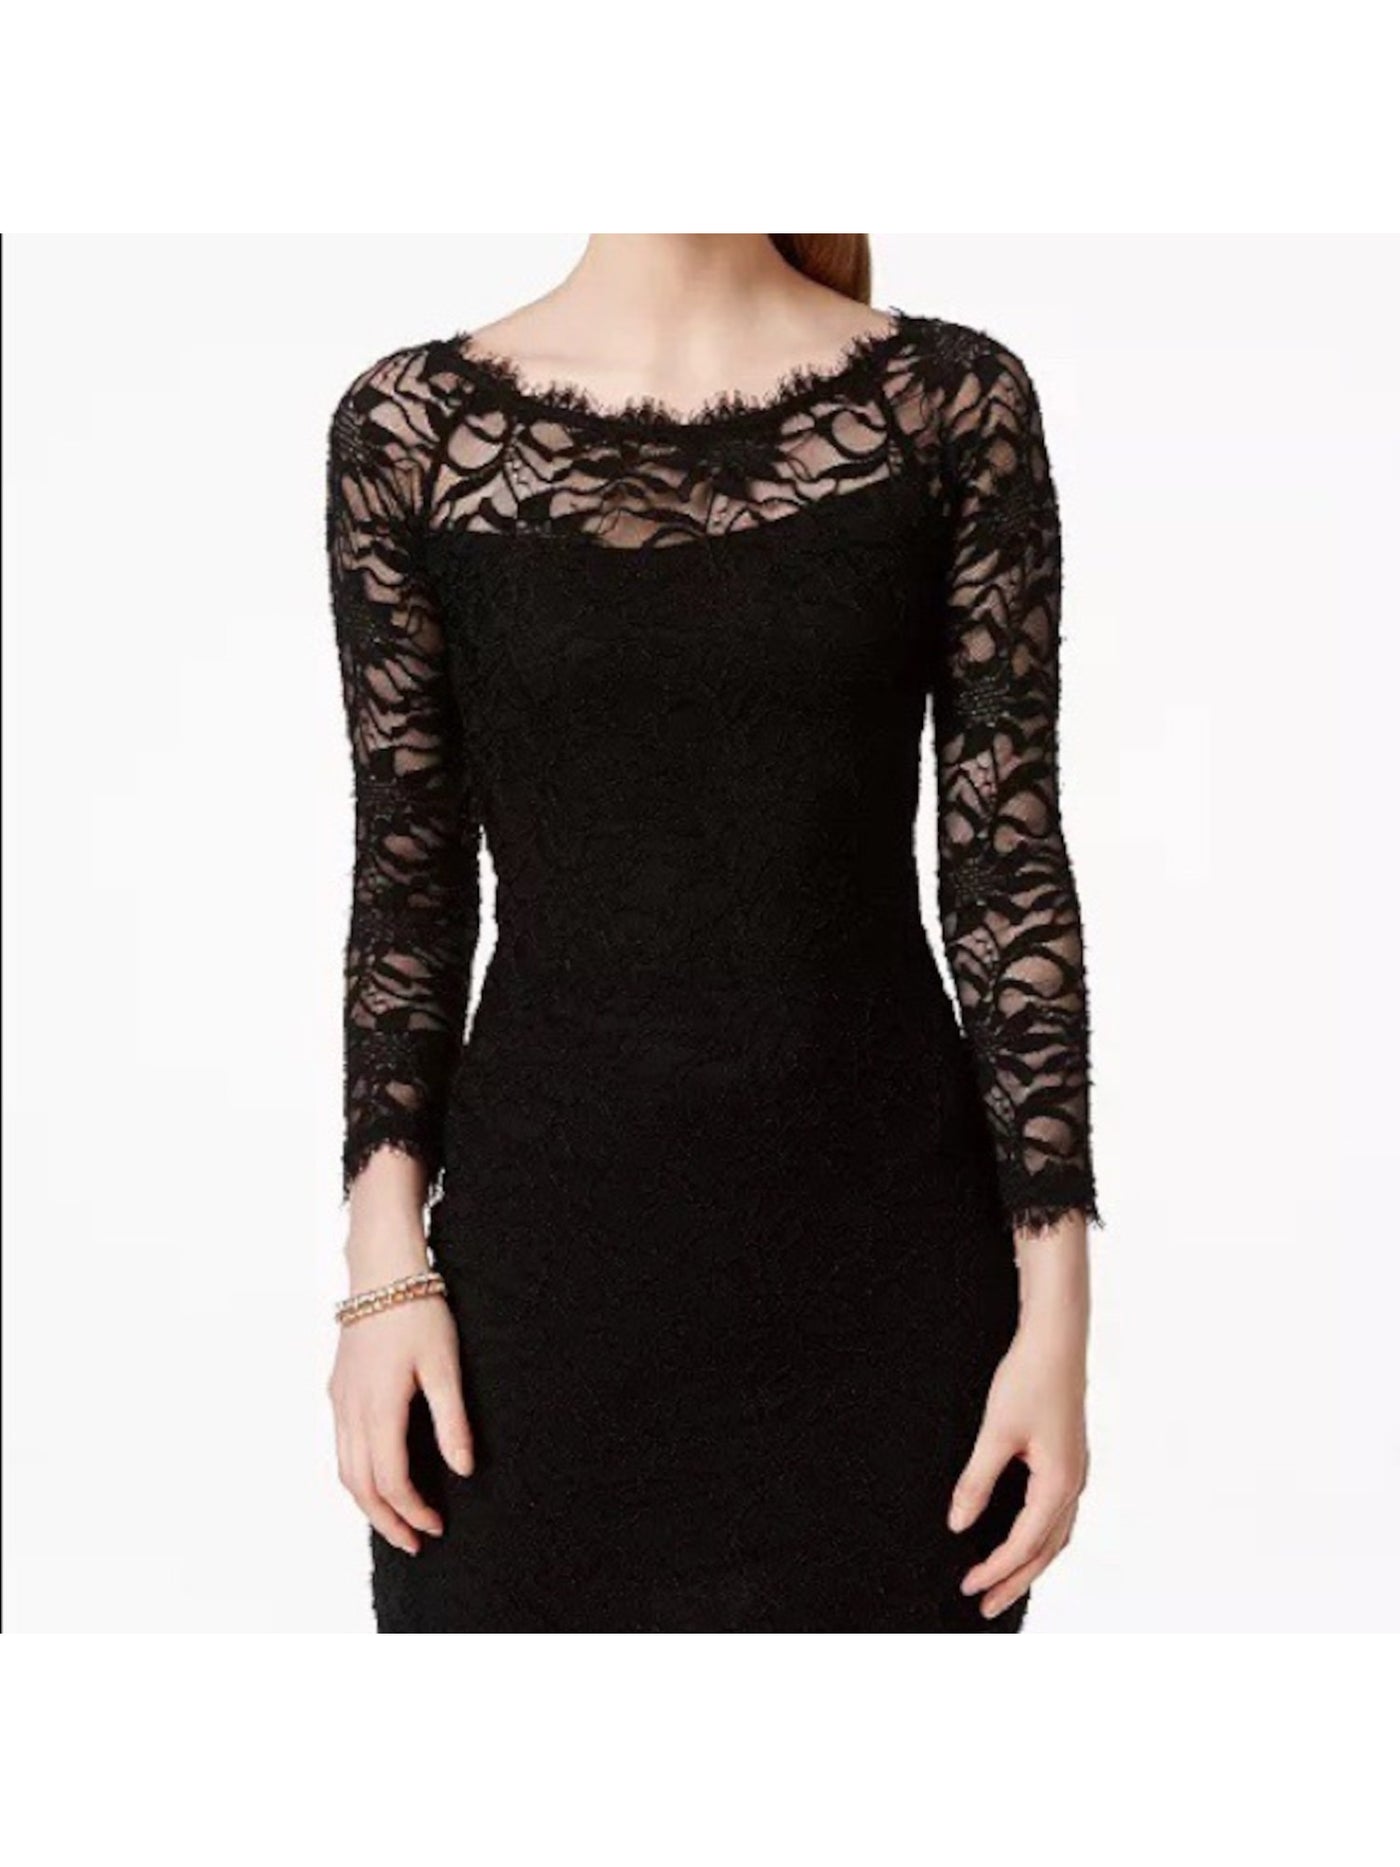 JUMP APPAREL Womens Black Lace Sheer Lined Fringed Long Sleeve Boat Neck Short Party Body Con Dress Juniors XS